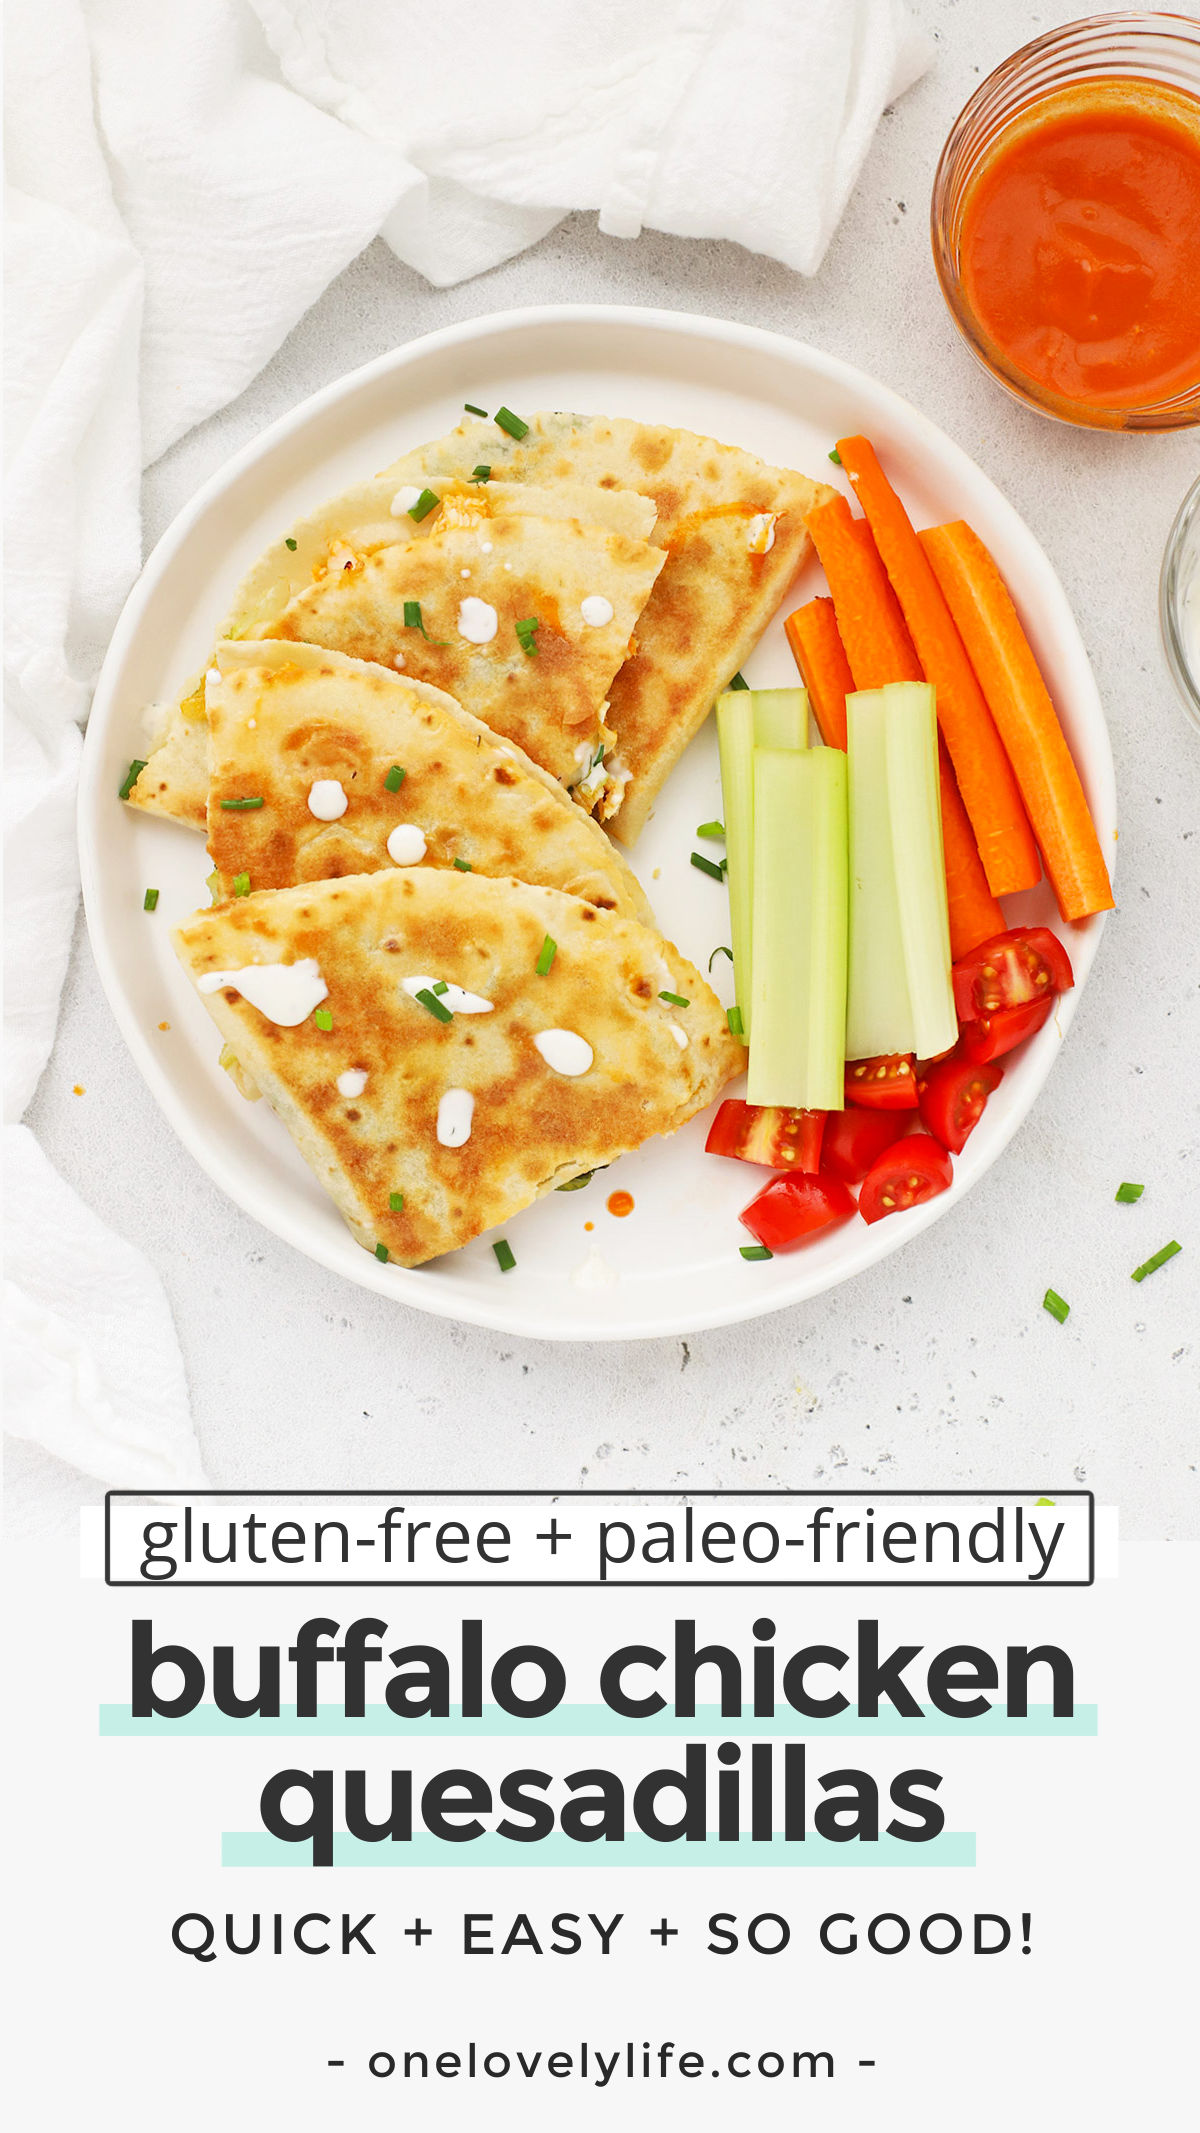 Buffalo Chicken Quesadillas - These gluten-free quesadillas are stuffed with Buffalo chicken, creamy ranch, lettuce, and your favorite cheese. They're quick, easy, and MAJORLY delicious! (Gluten-Free, Grain-Free Friendly // Buffalo Quesadillas // Buffalo Chicken Recipes